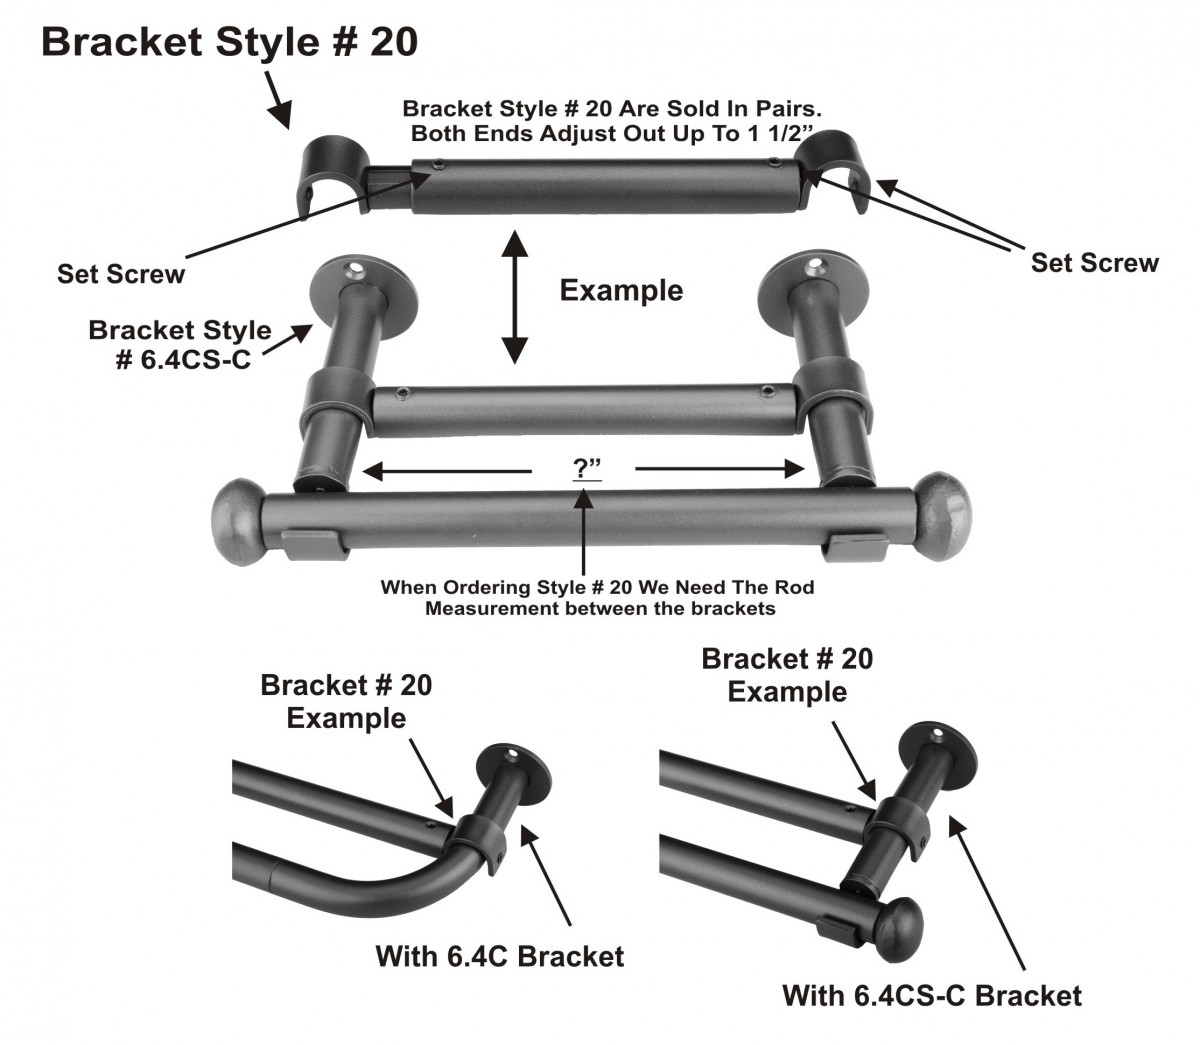 Add a Back Rod System Bracket Style #20 for 3/4" and  1 1/4" Rods